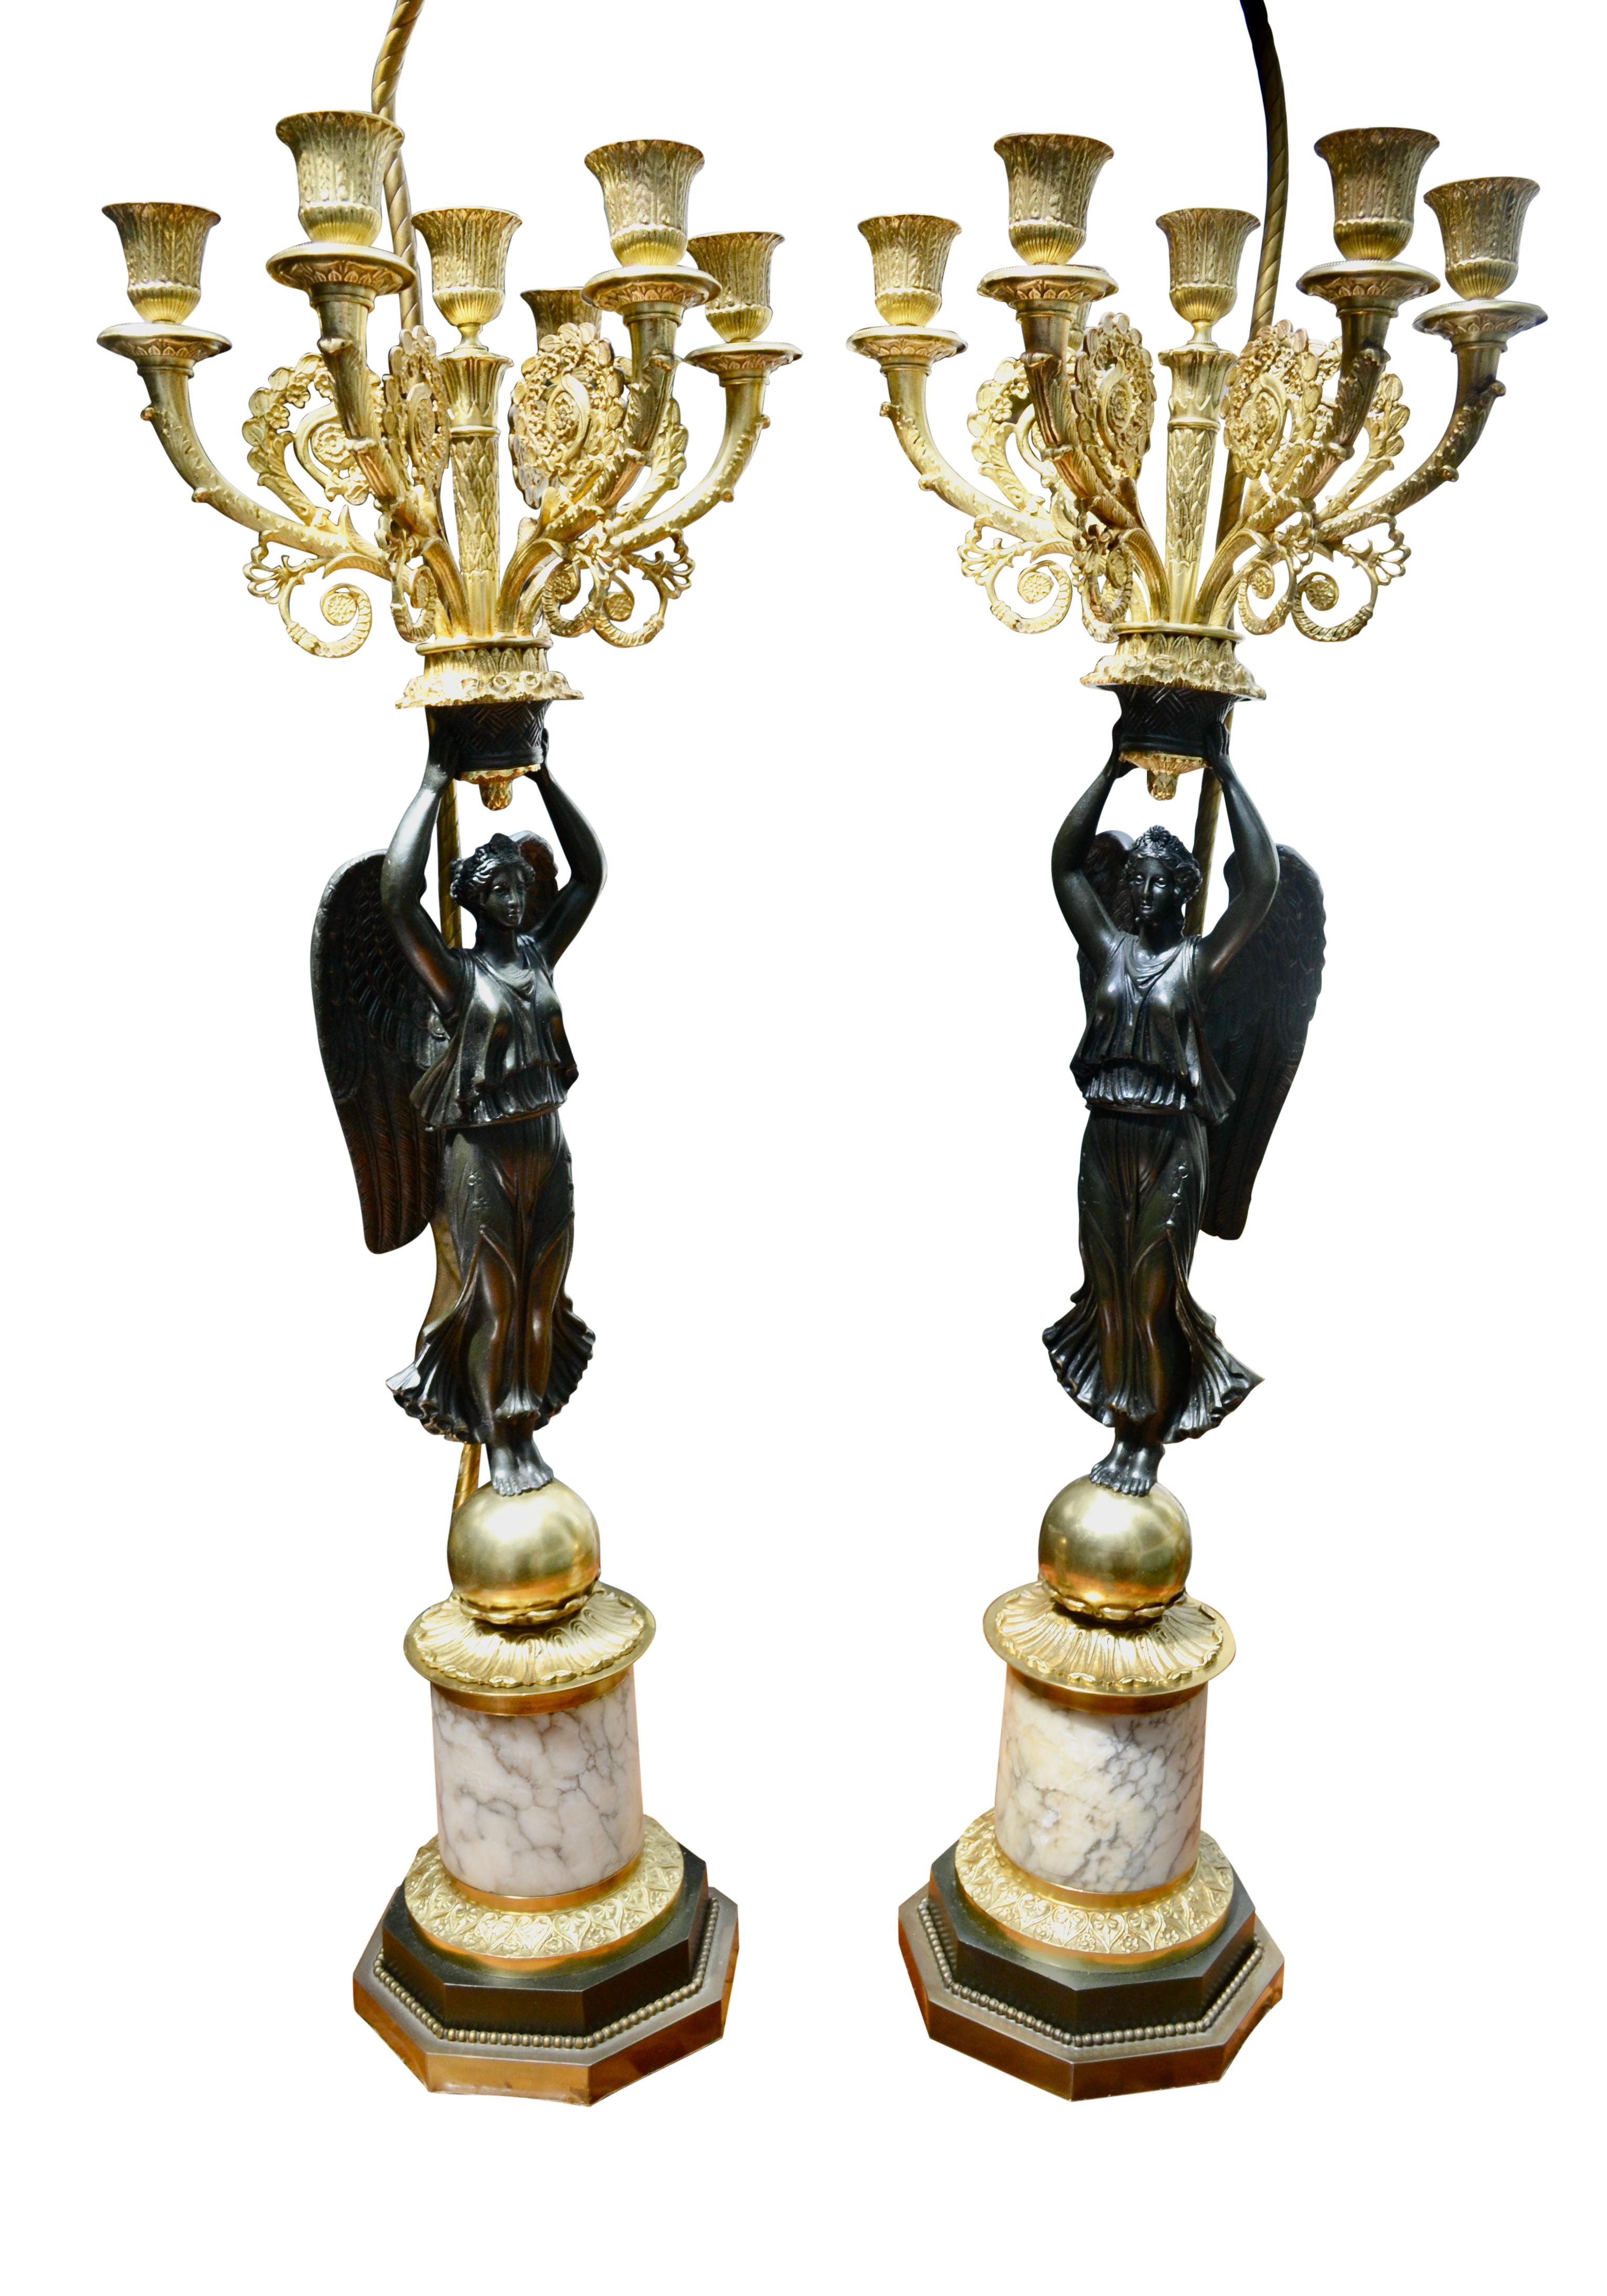 19th Century A Pair of French Empire Style Patinated and Gilt Bronze Winged Victory Lamps For Sale